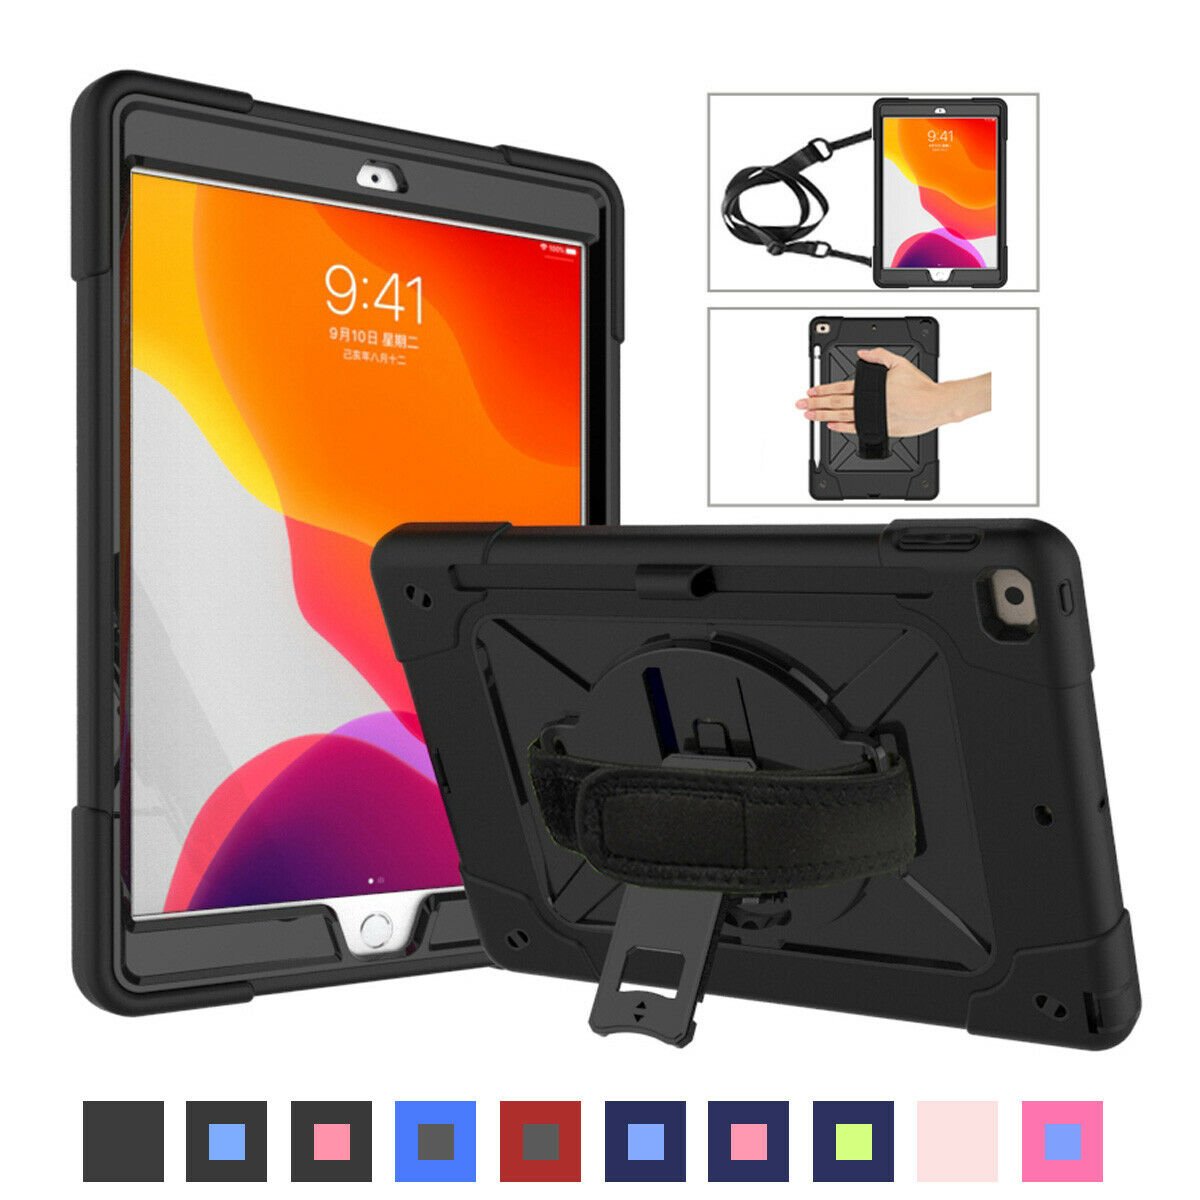 Hybrid Silicone Shoulder Strap Tablet Case For iPad 10.2" 7th Generation 2019 2